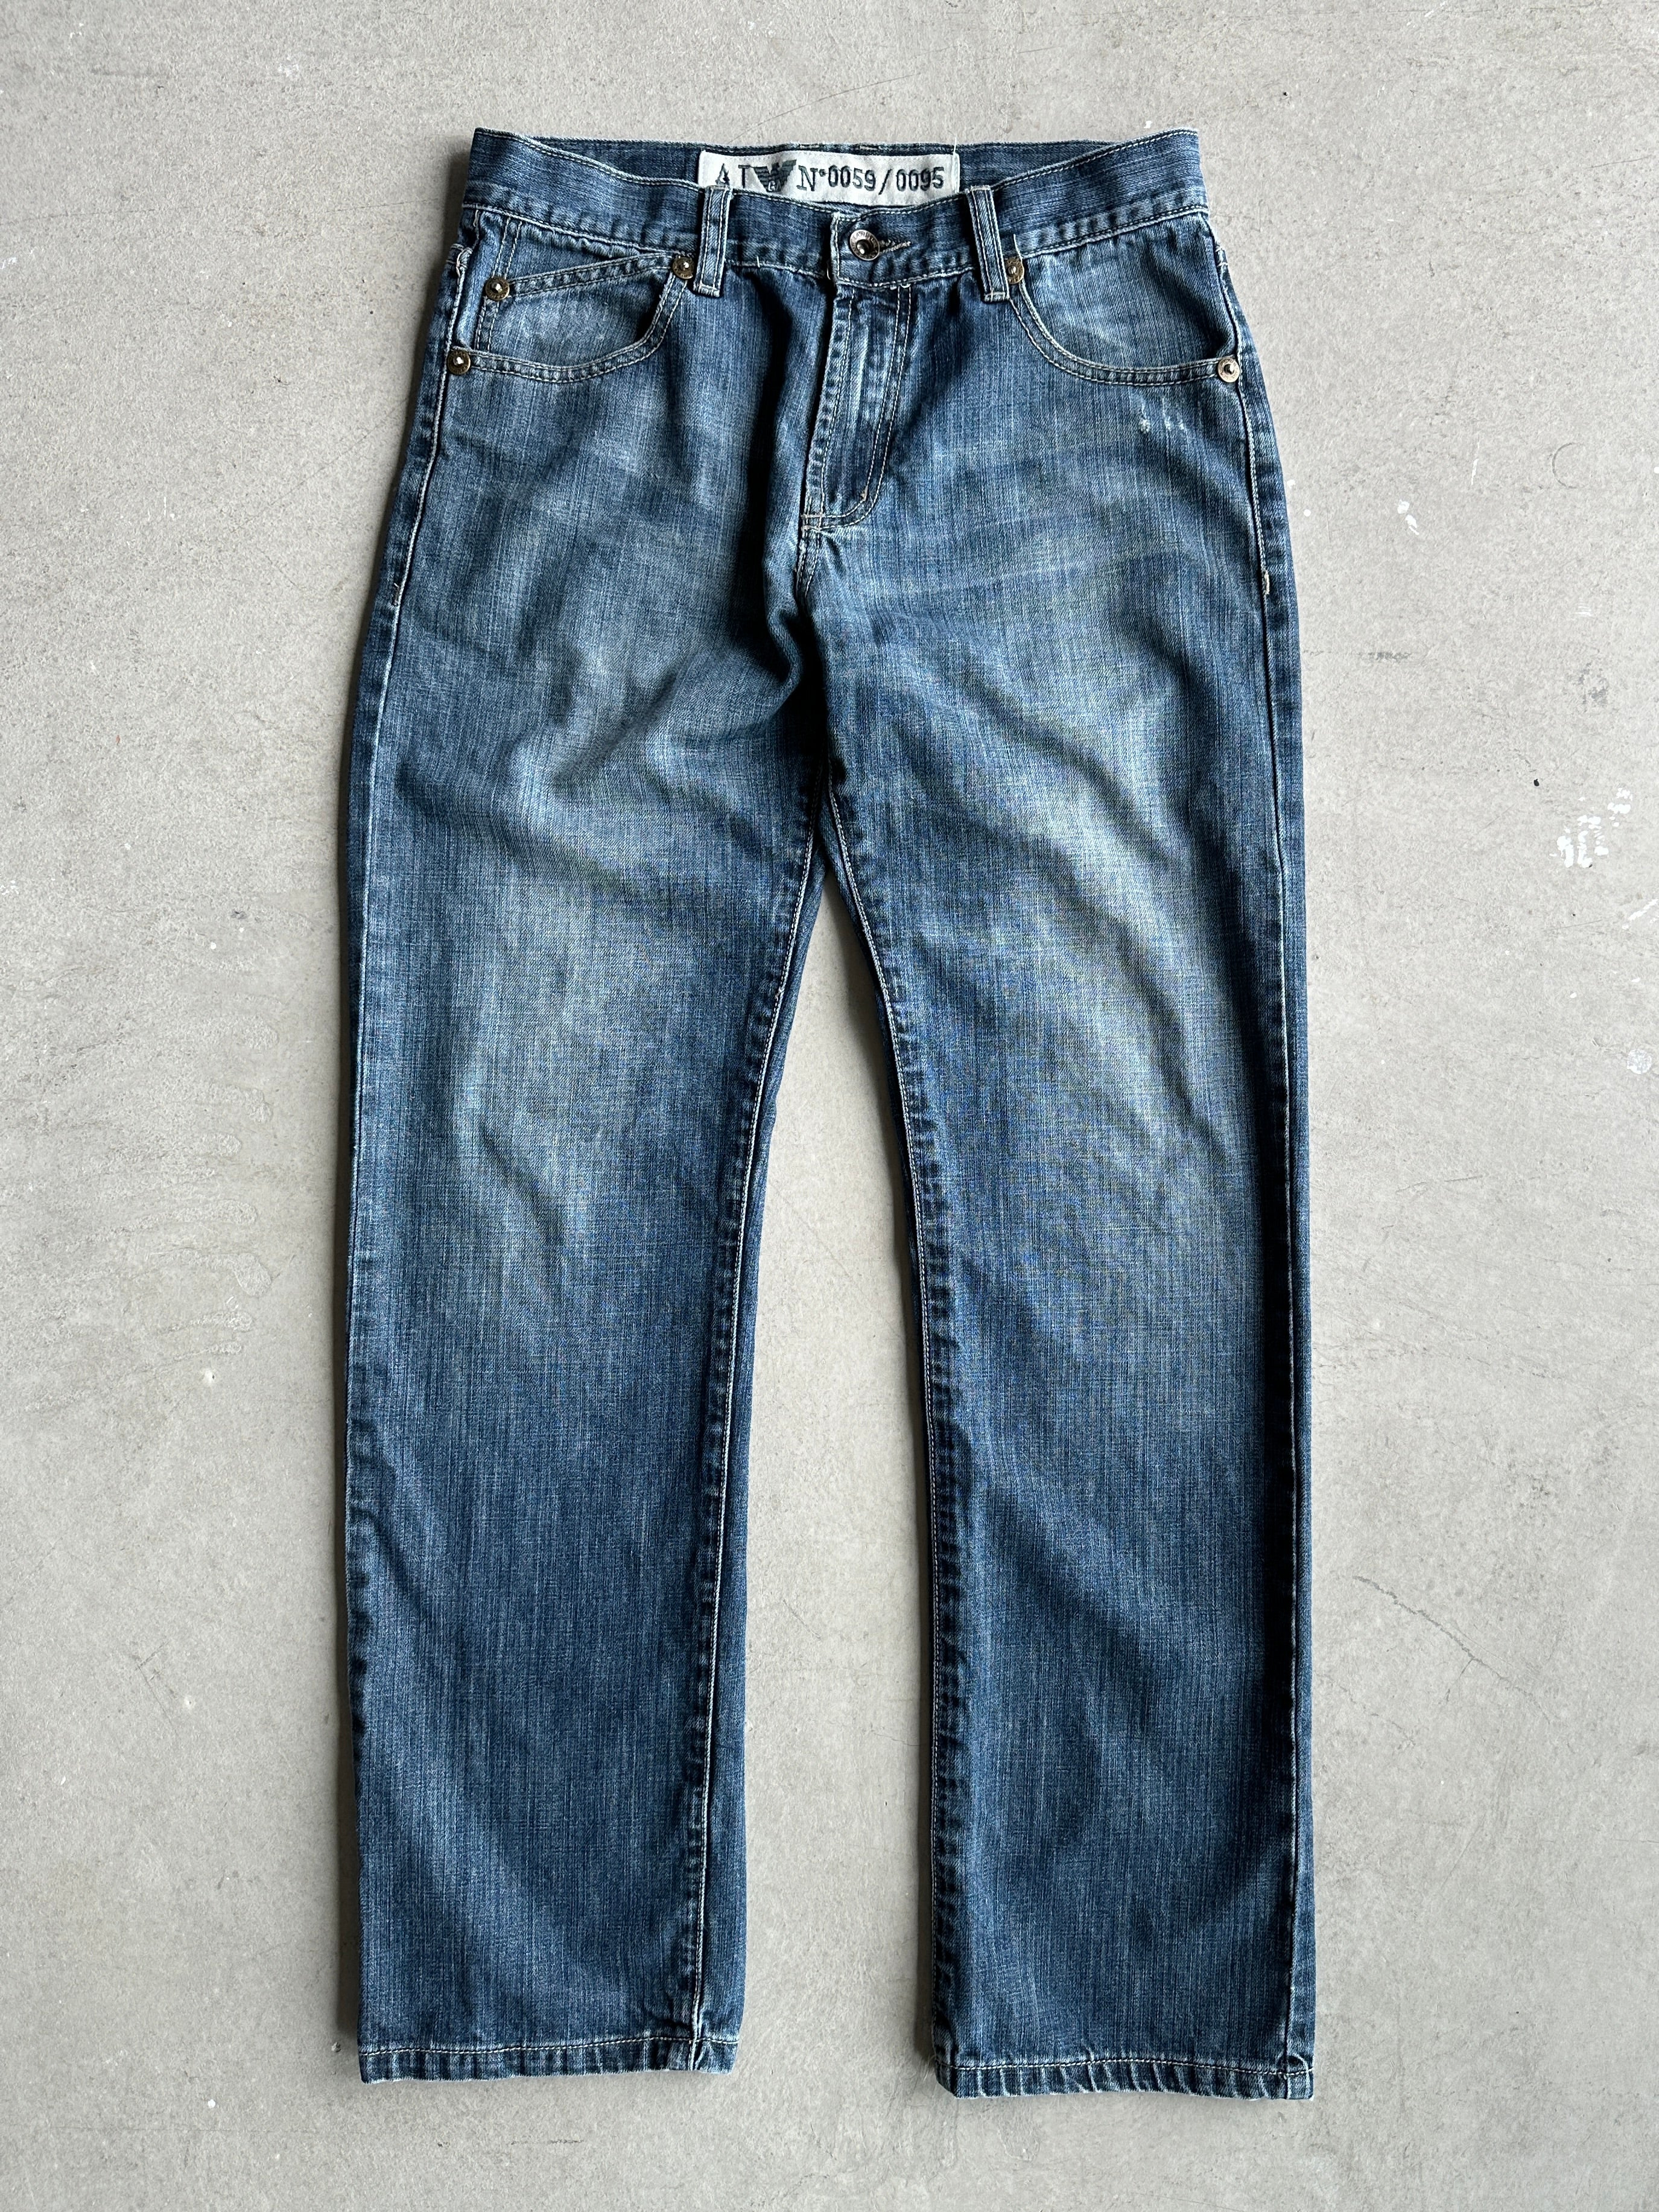 ARMANI JEANS - 1990s STRAIGHT FIT JEANS